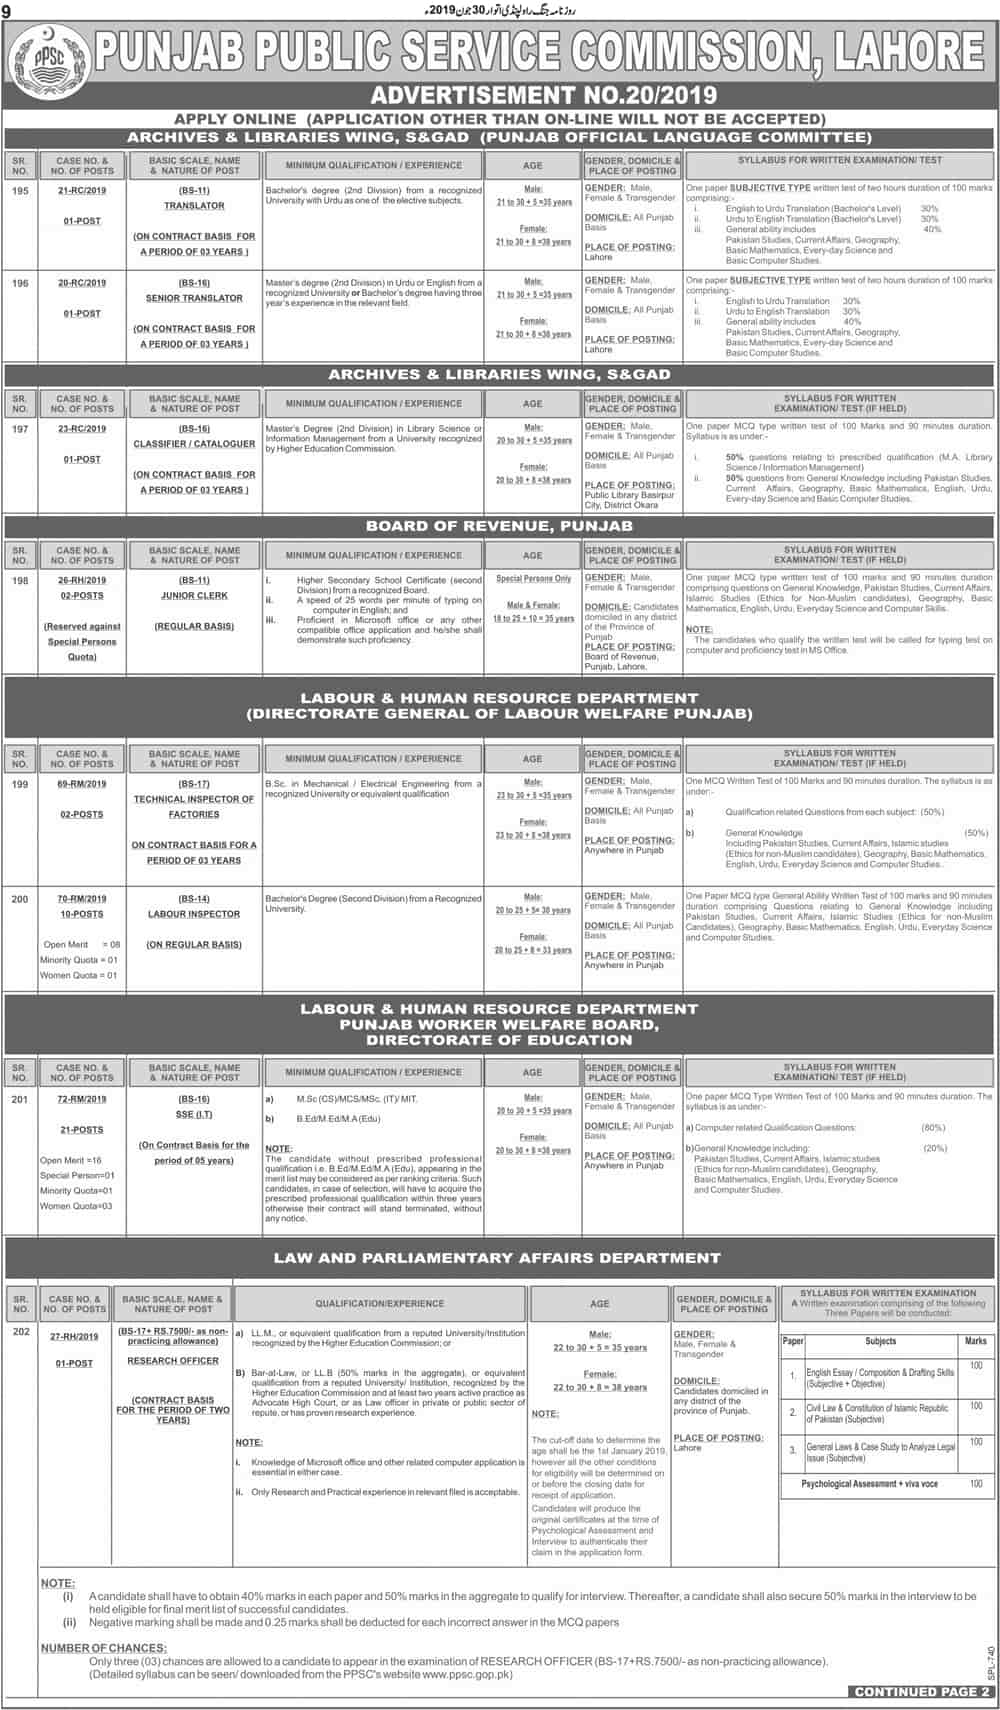 ppsc-jobs-today-advertisement-no-20-2019-apply-online-filectory